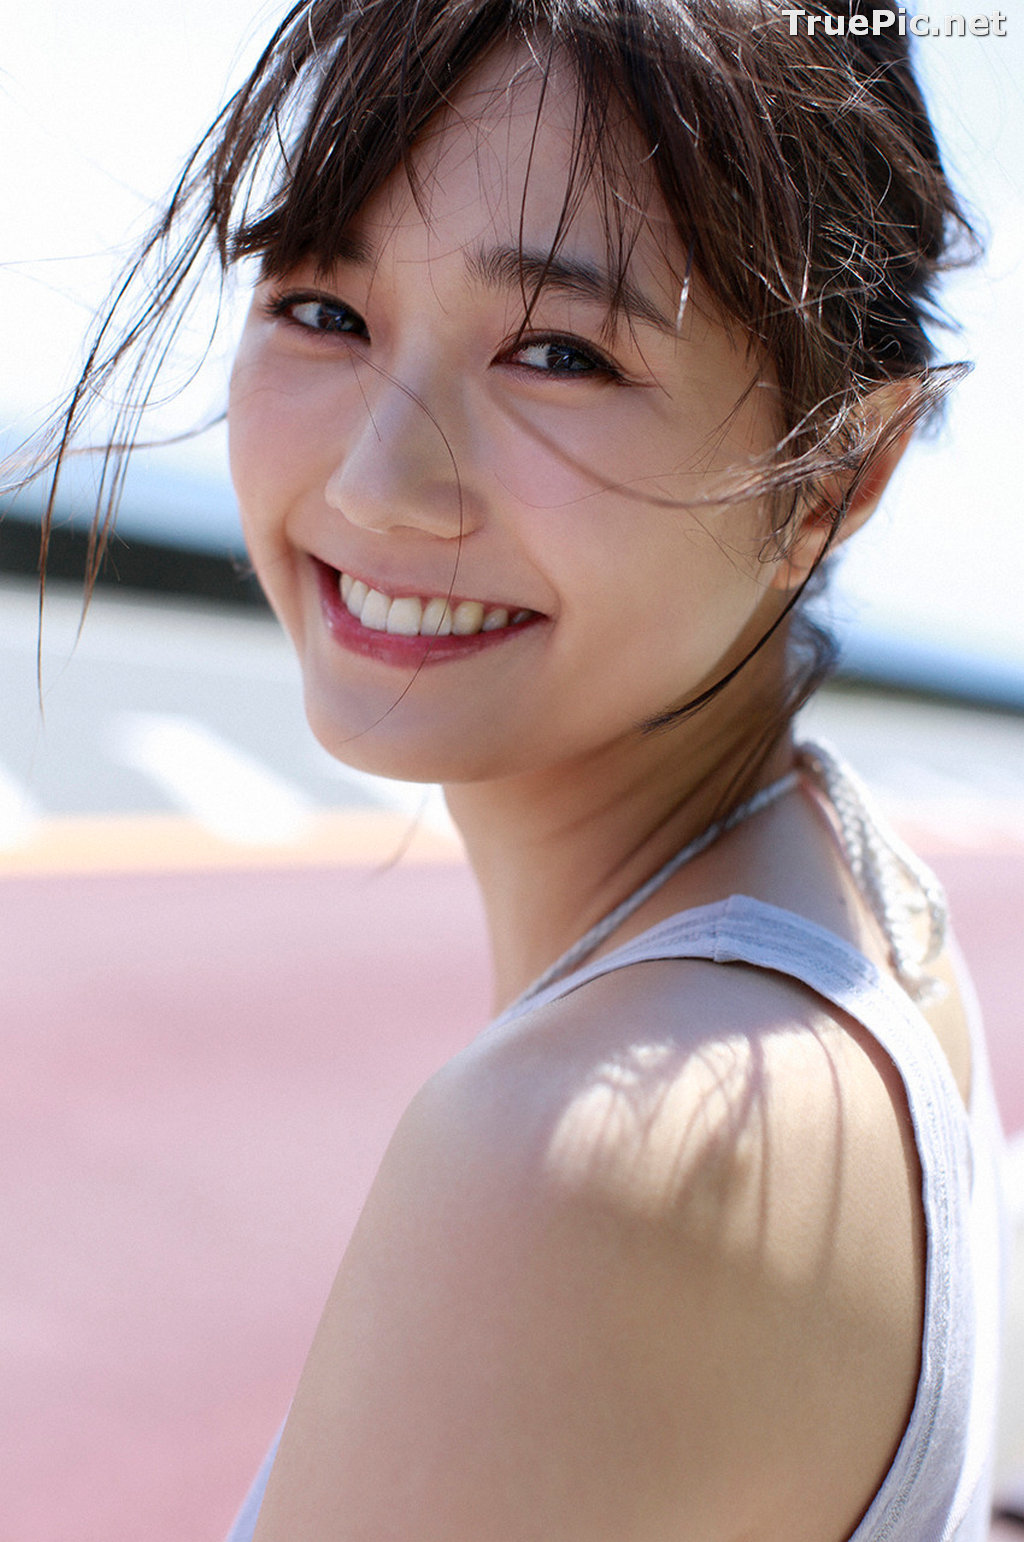 Image Japanese Model and Actress - Yuuna Suzuki - Sexy Picture Collection 2020 - TruePic.net - Picture-36